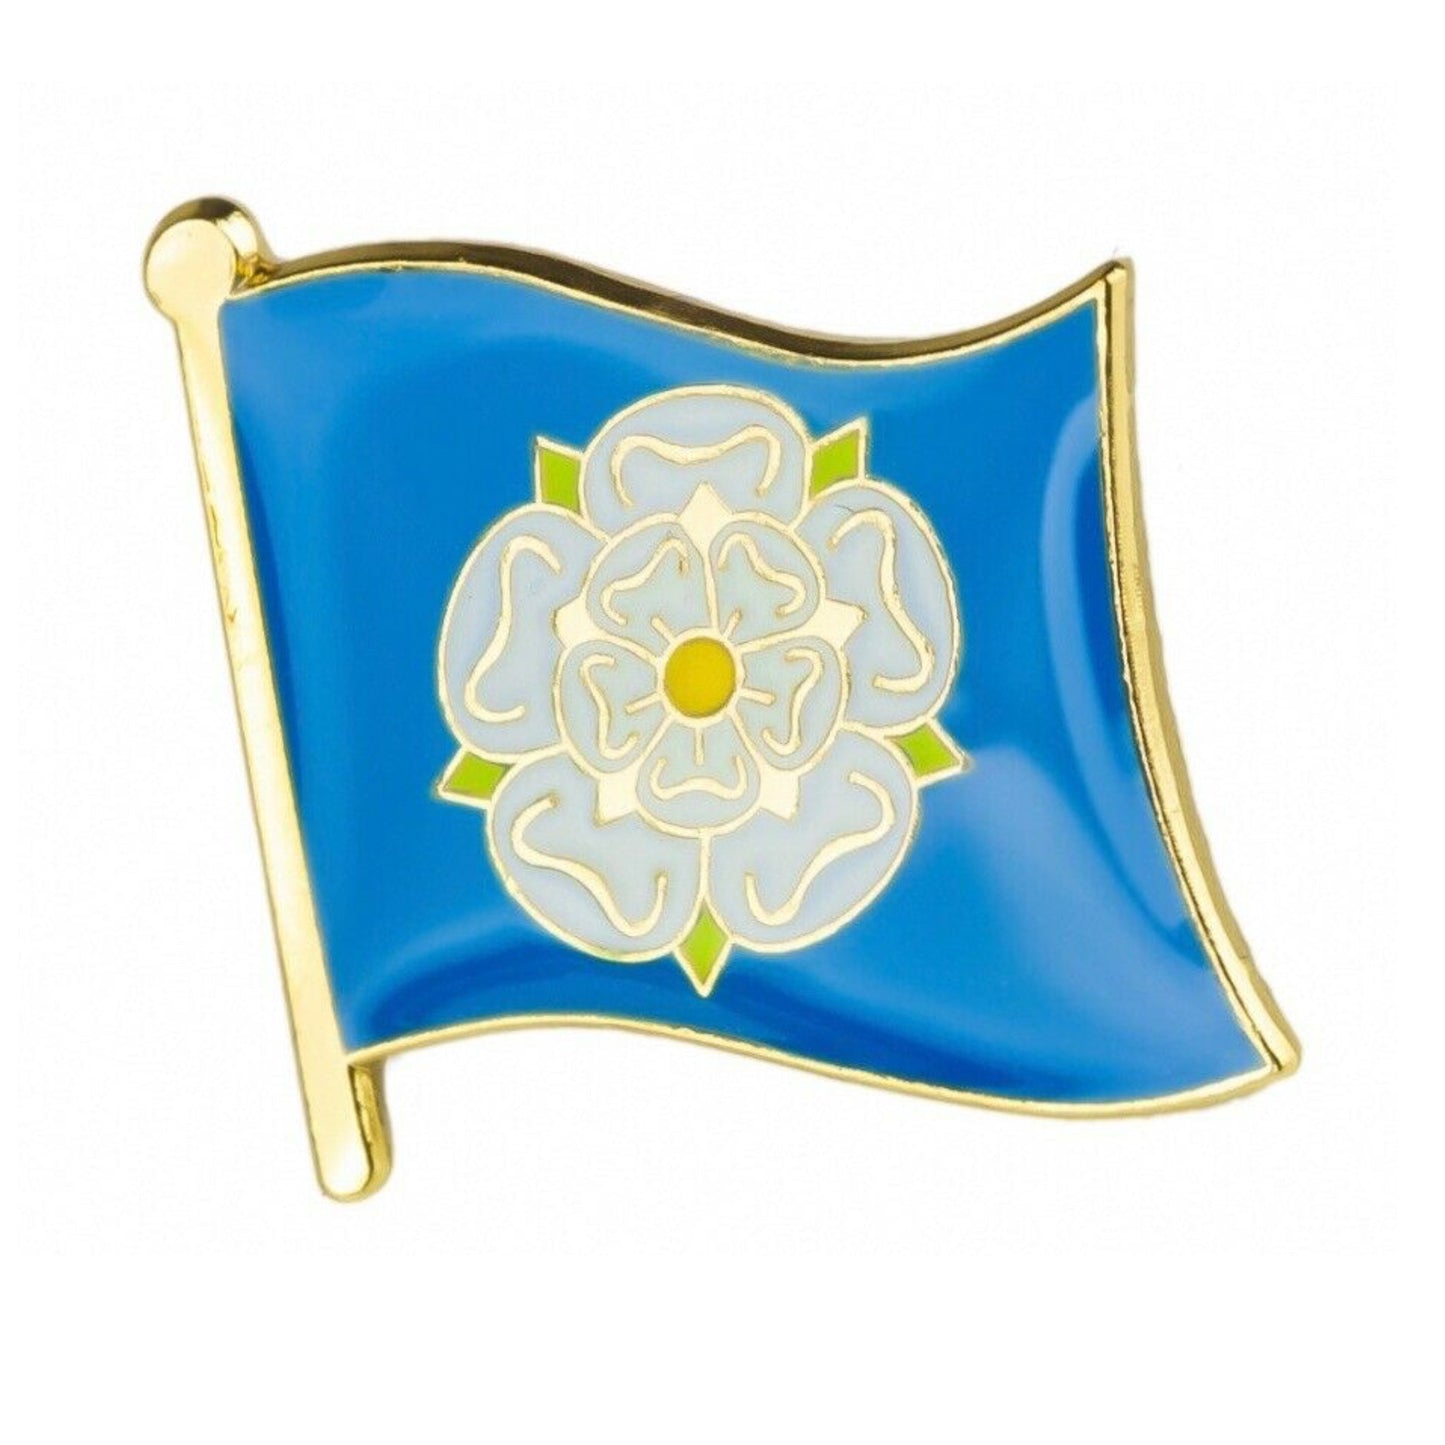 Yorkshire Flag Pin Badge - The Great Yorkshire Shop